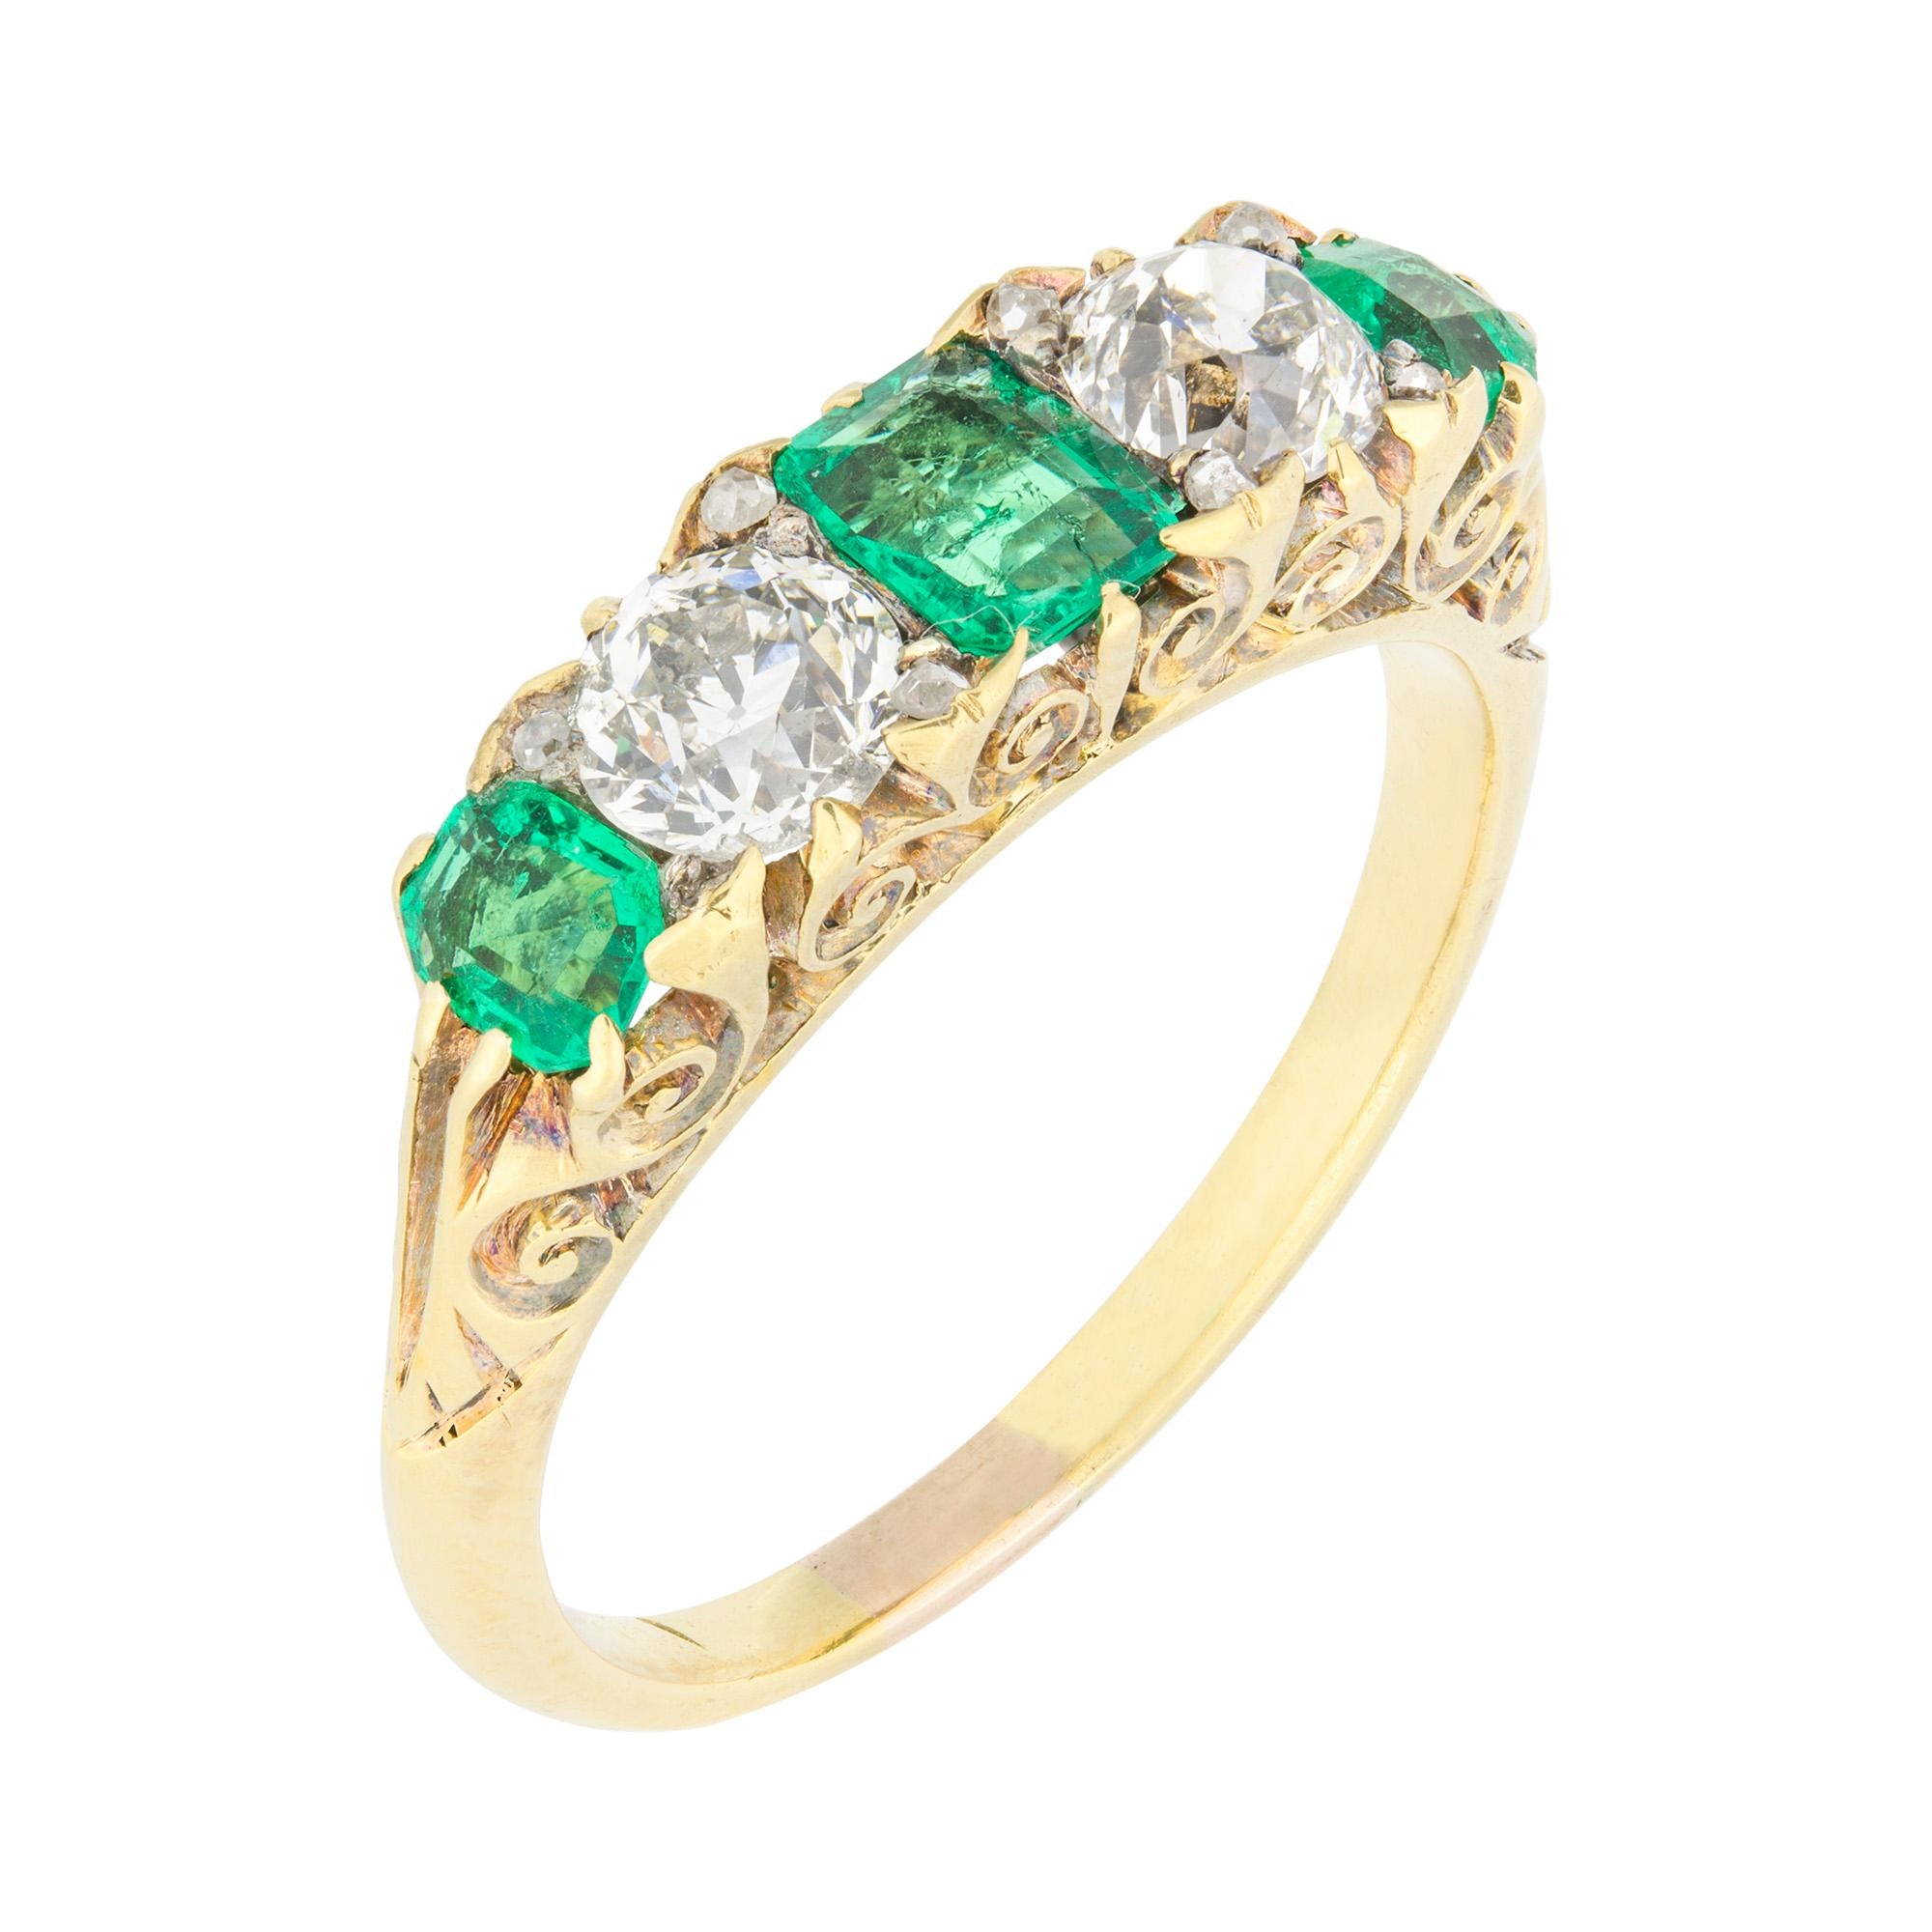 A late Victorian emerald and diamond carved half hoop ring, the three graduating emerald-cut emeralds, estimated to weigh a total of 0.6 carats, and two old brilliant-cut diamonds, estimated to weigh a total of 0.6 carats, with rose-cut diamonds set